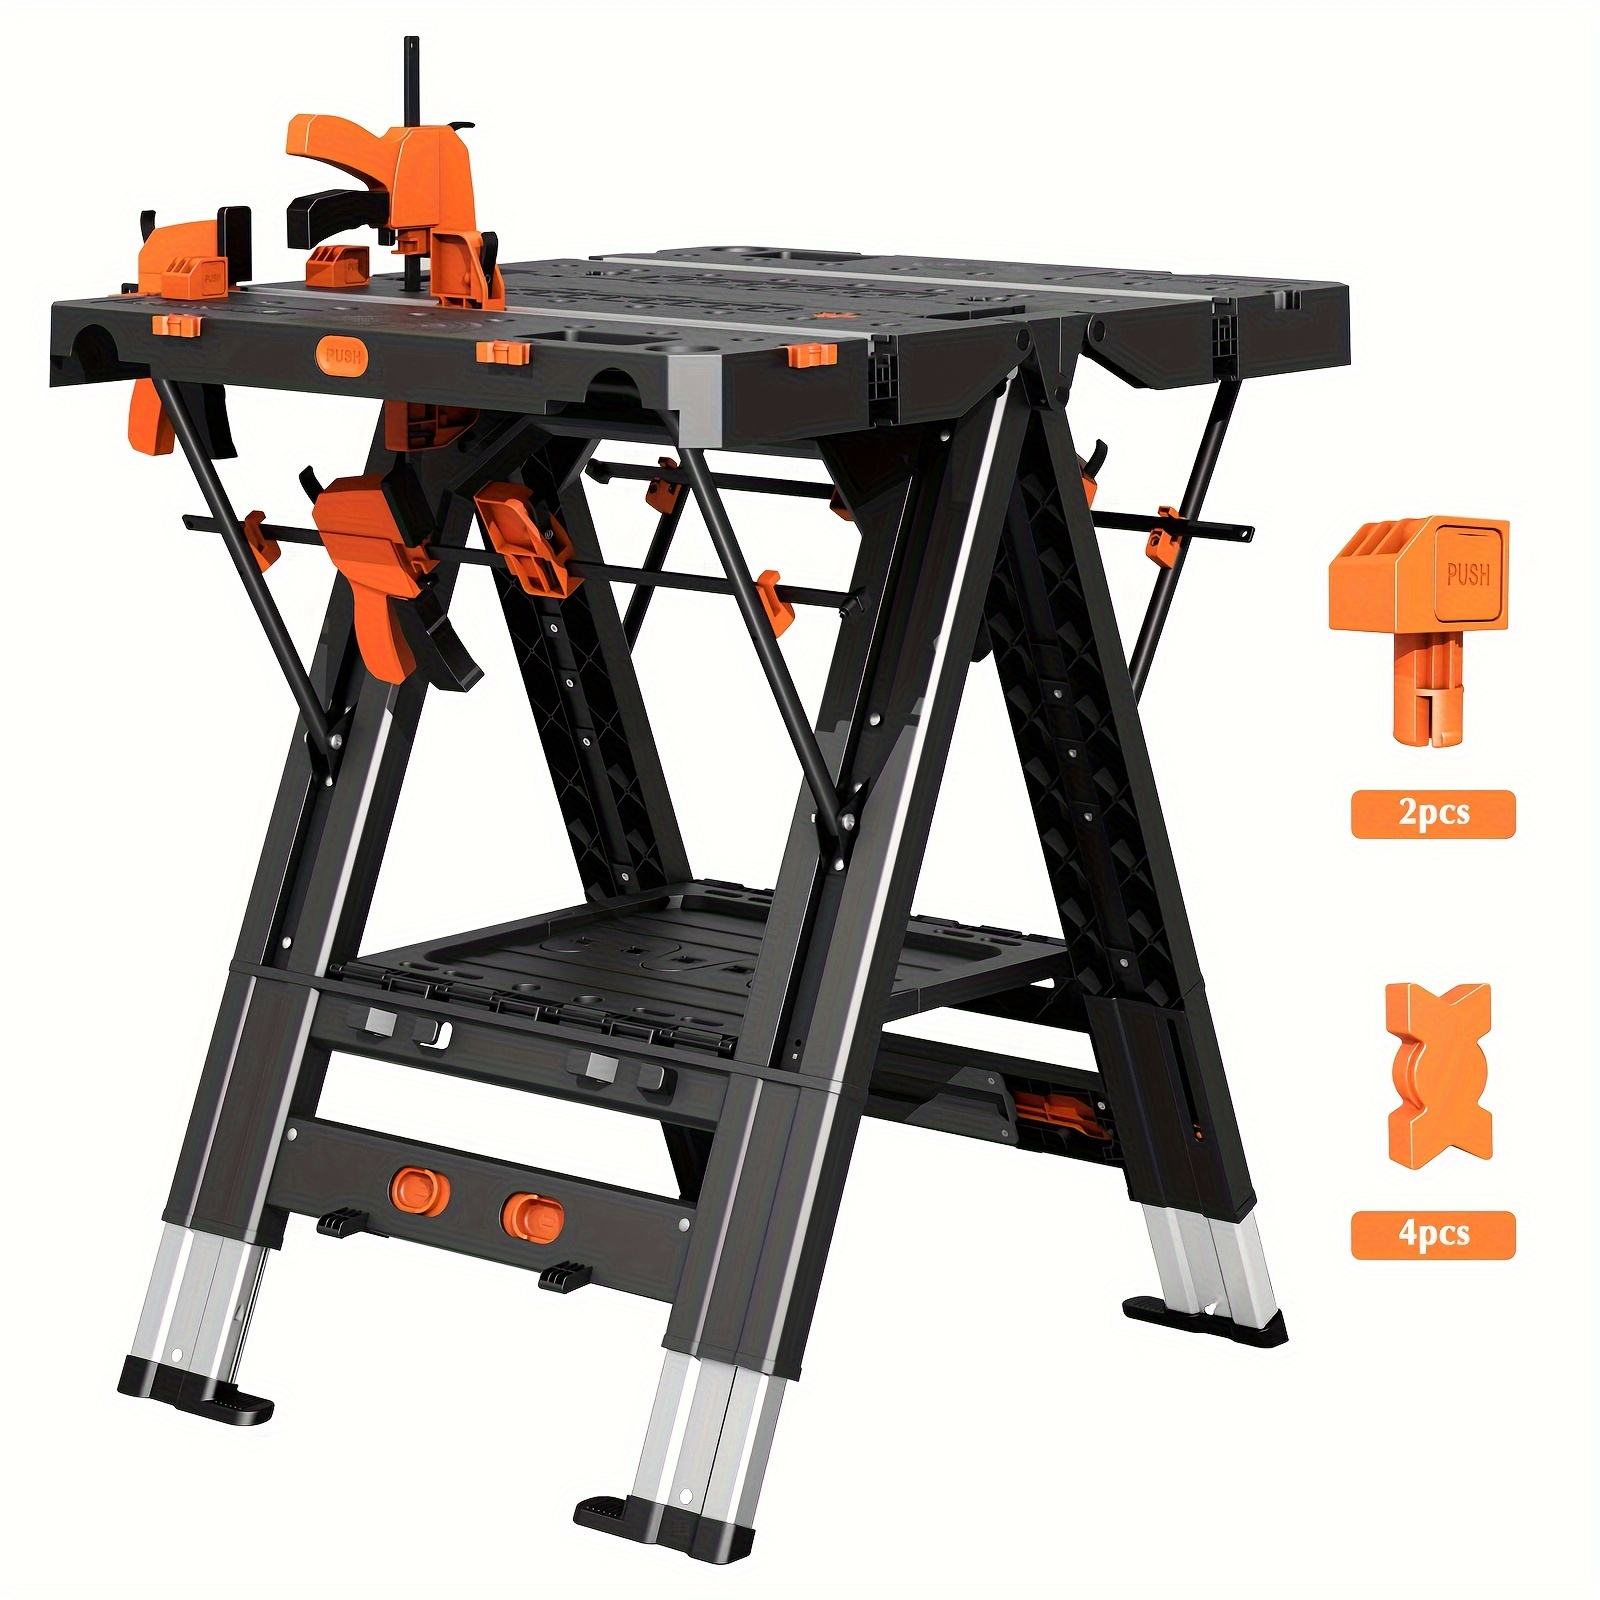 

2-in-1 Folding Workbench, Waterproof Portable Folding Work Table, 31" W X 25" D X 32" H Workbench, Height-adjustable Work Table With 4 Woodworking Clamps, 4 Connecting Blocks, 2 Limit Blocks